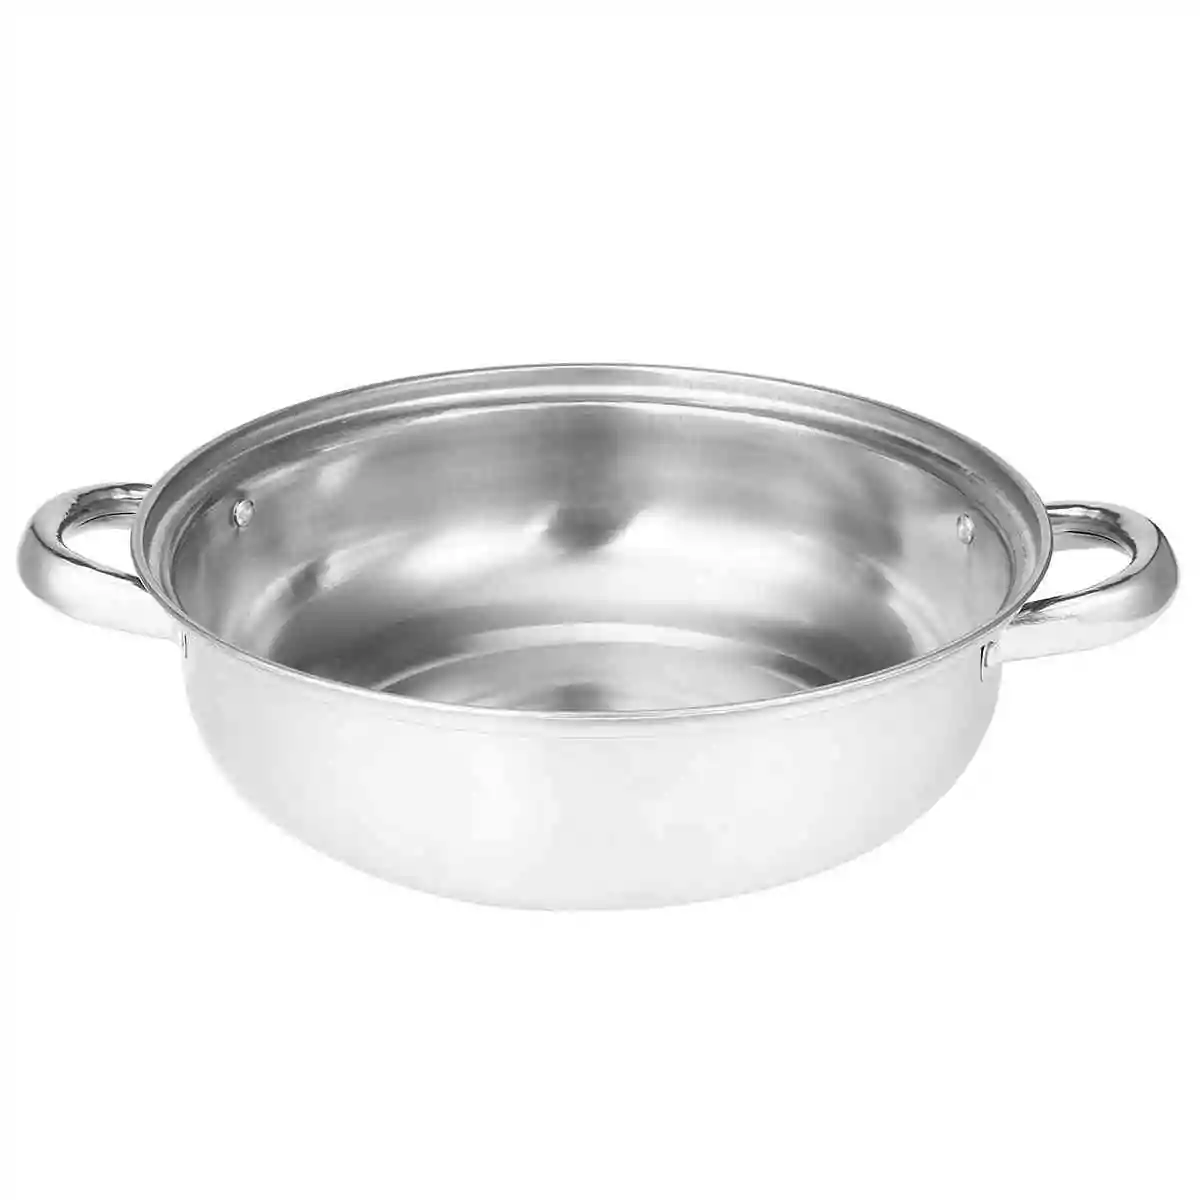 Stainless Steel 2 Tier Food Steaming pot